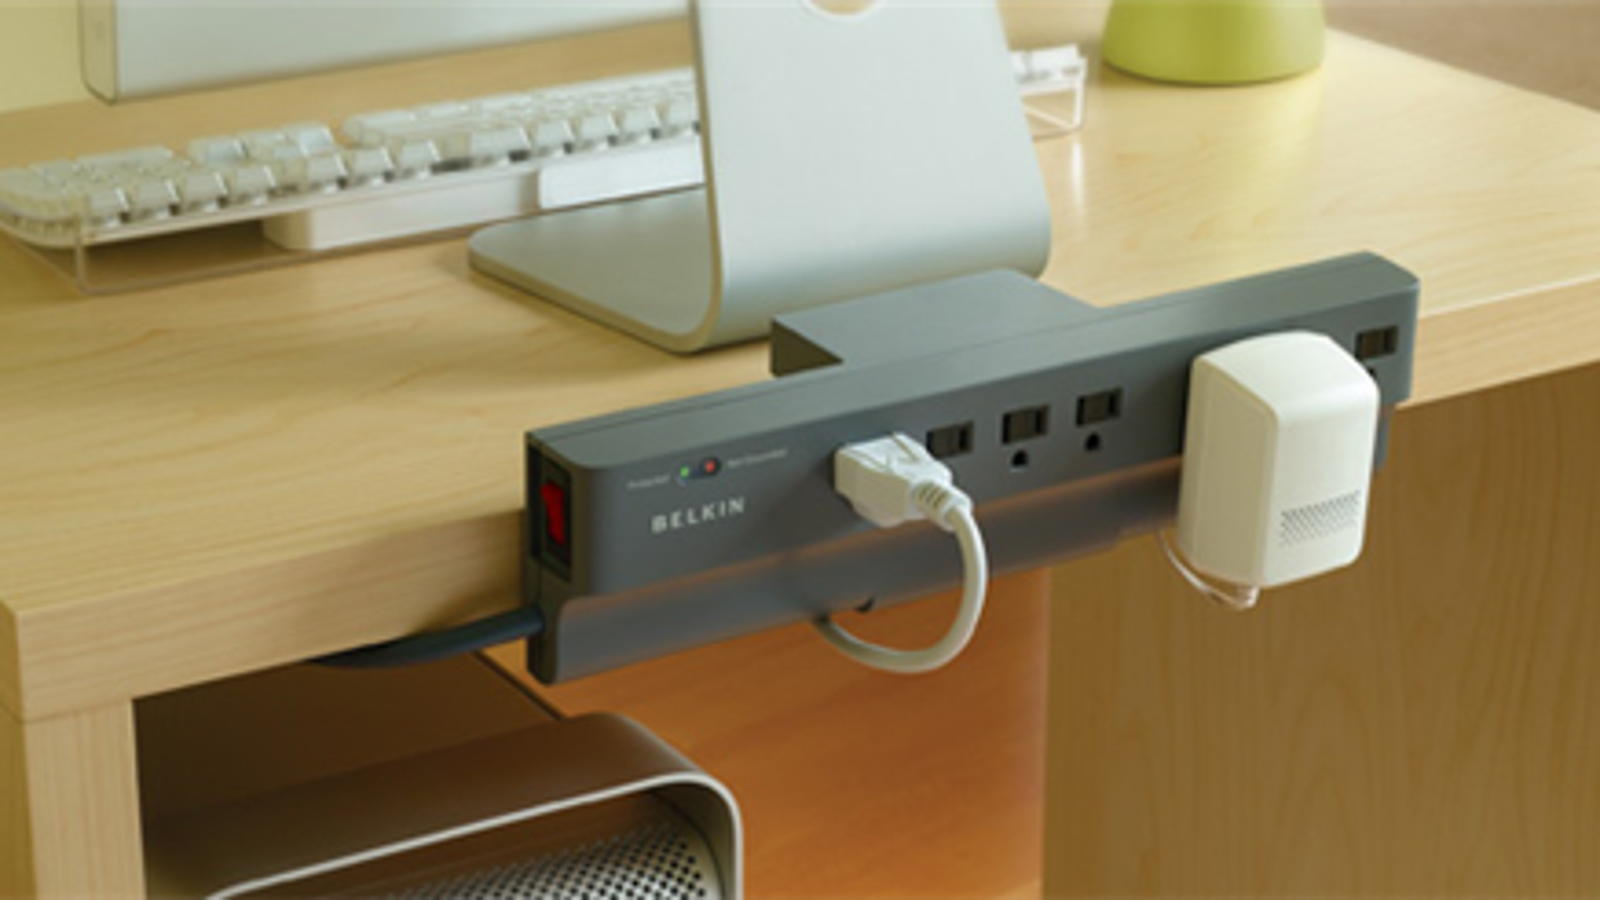 Surge Protector Meet Cord Management